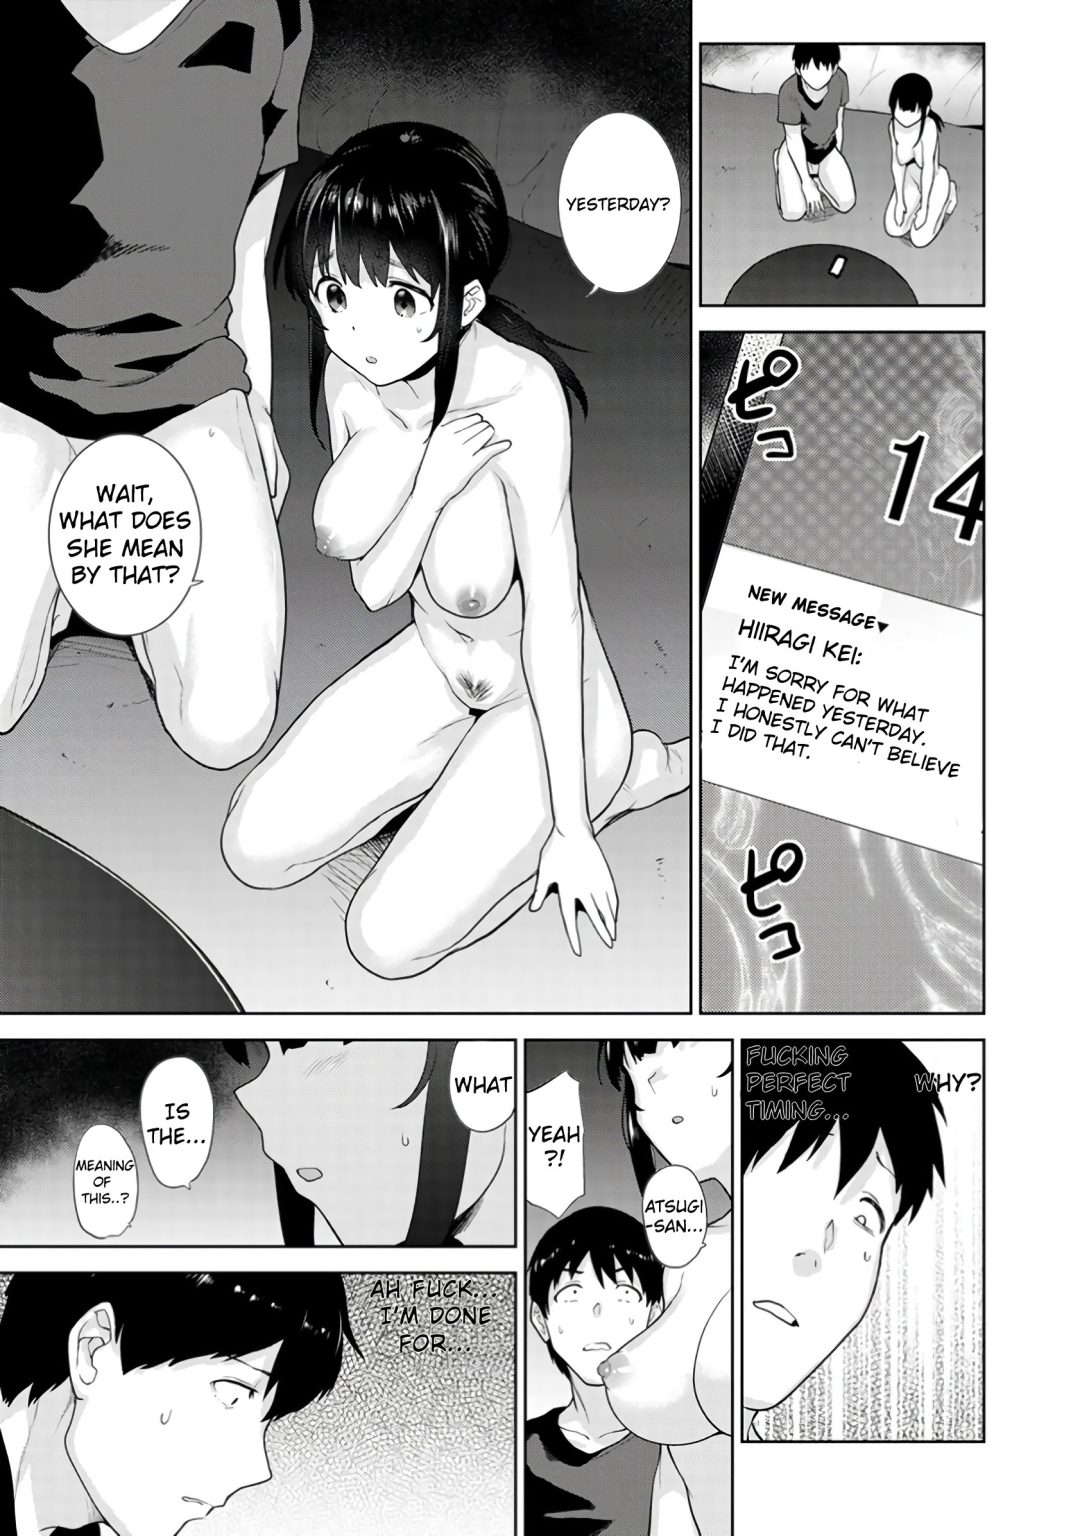 Method to Catch a Pretty Girl 9 hentai manga picture 1